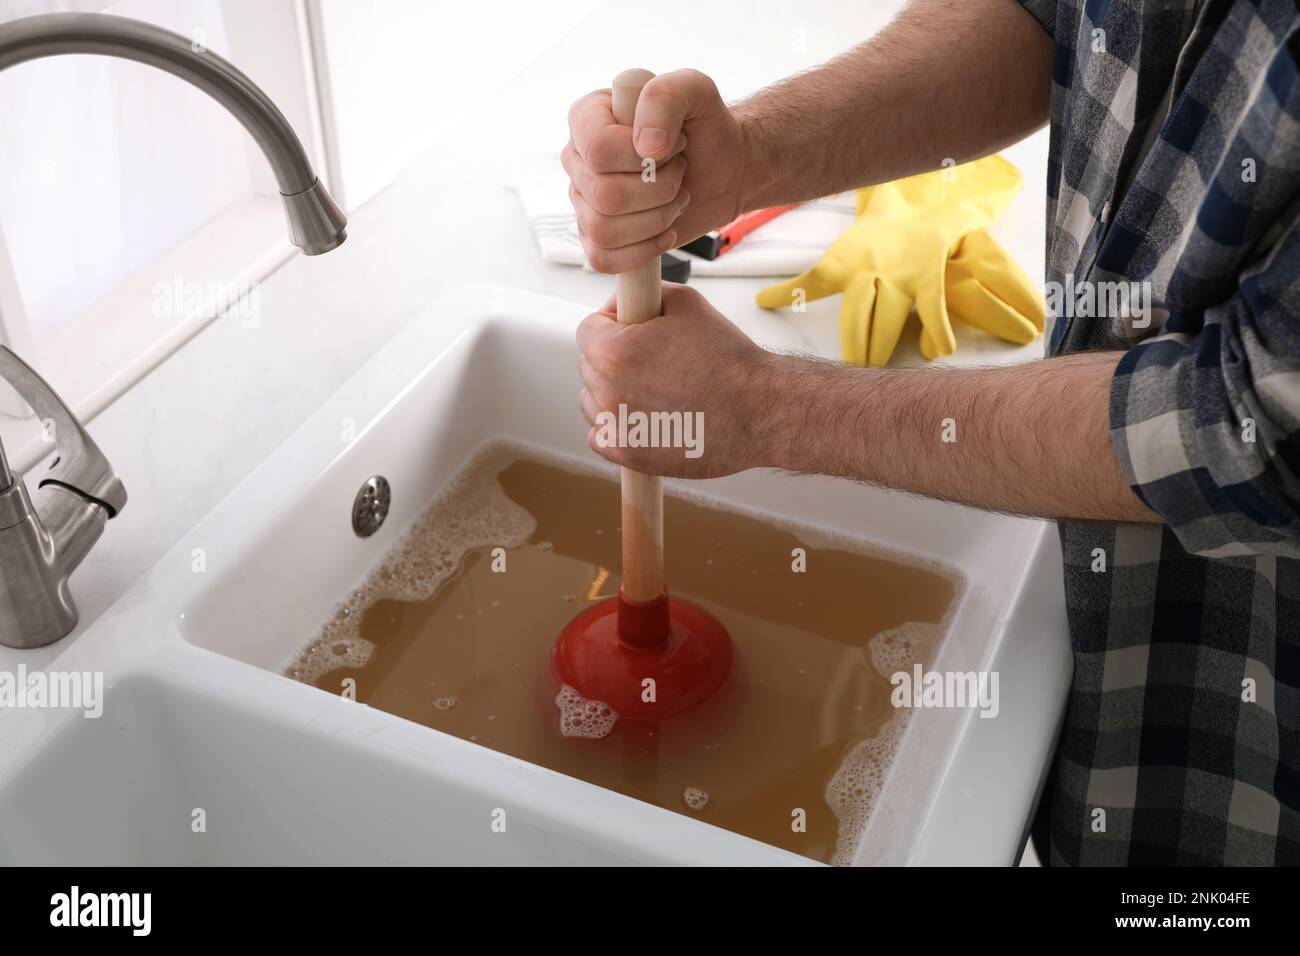 Closeup Of Man Using Plunger In Kitchen Sink Stock Photo, Picture and  Royalty Free Image. Image 23490896.